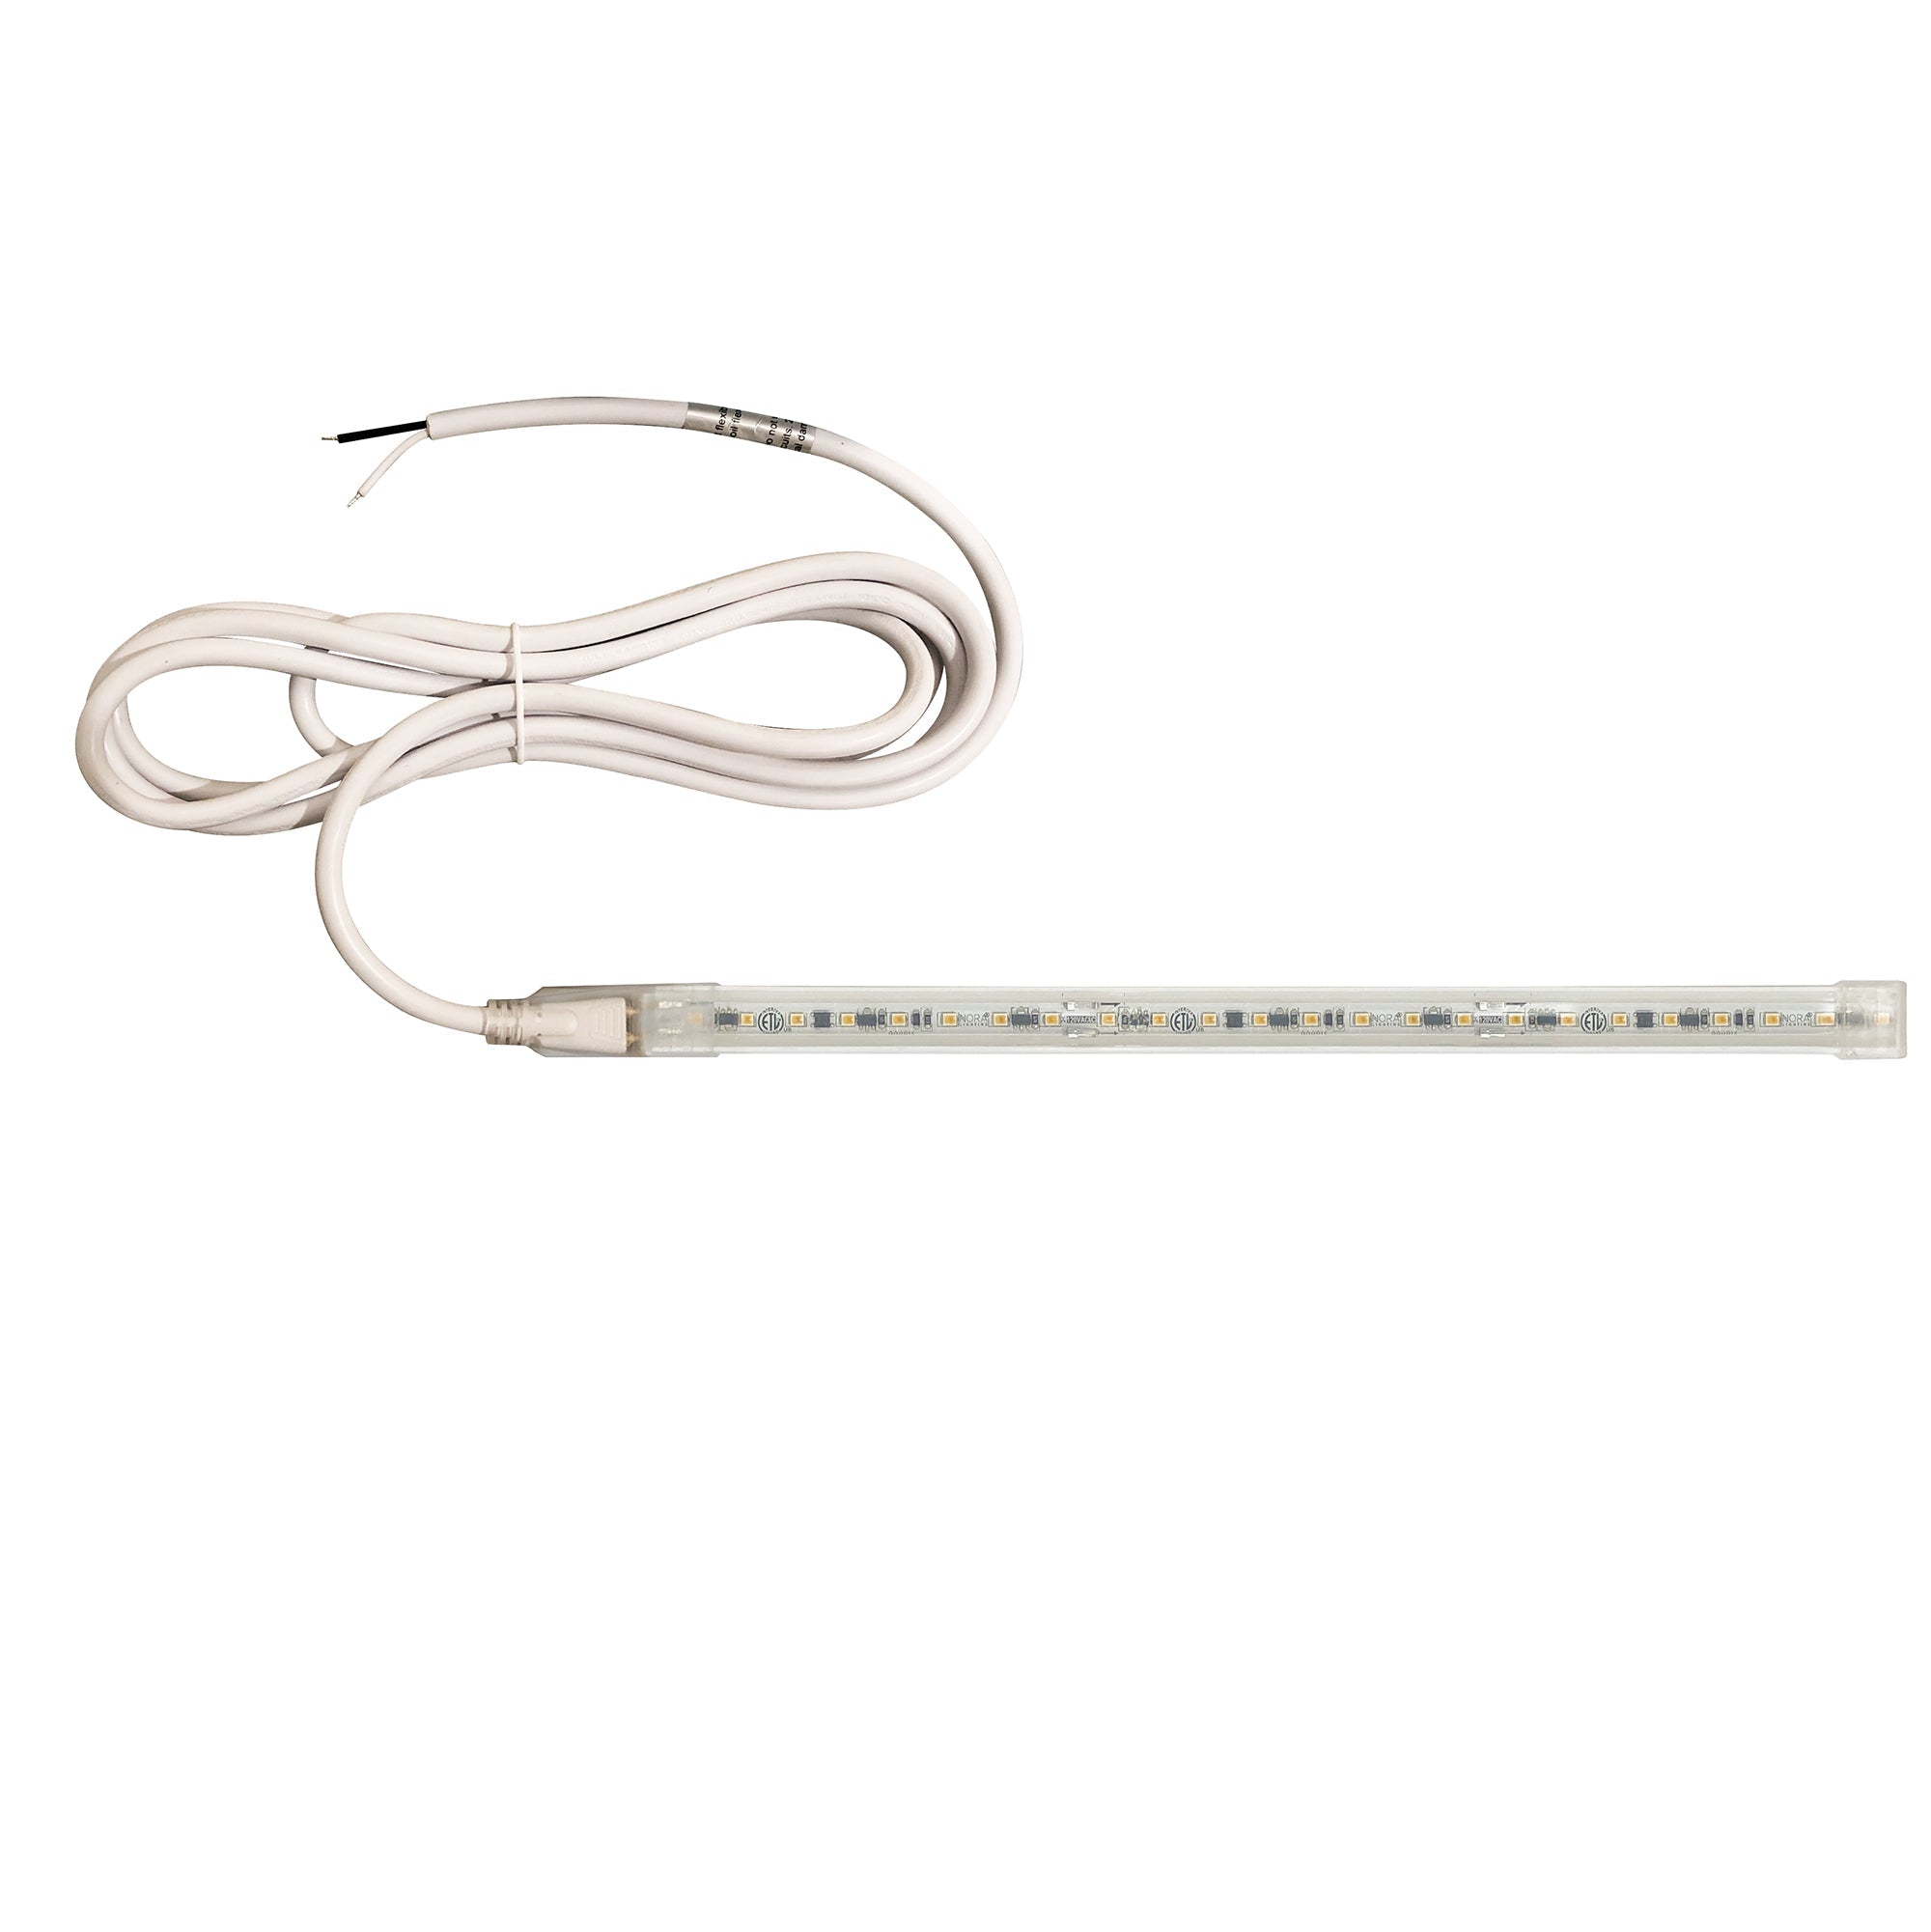 Nora Lighting NUTP13-W8-12-930/HW - Accent / Undercabinet - Custom Cut 8-ft 120V Continuous LED Tape Light, 330lm / 3.6W per foot, 3000K, w/ Mounting Clips and 8' Hardwired Power Cord